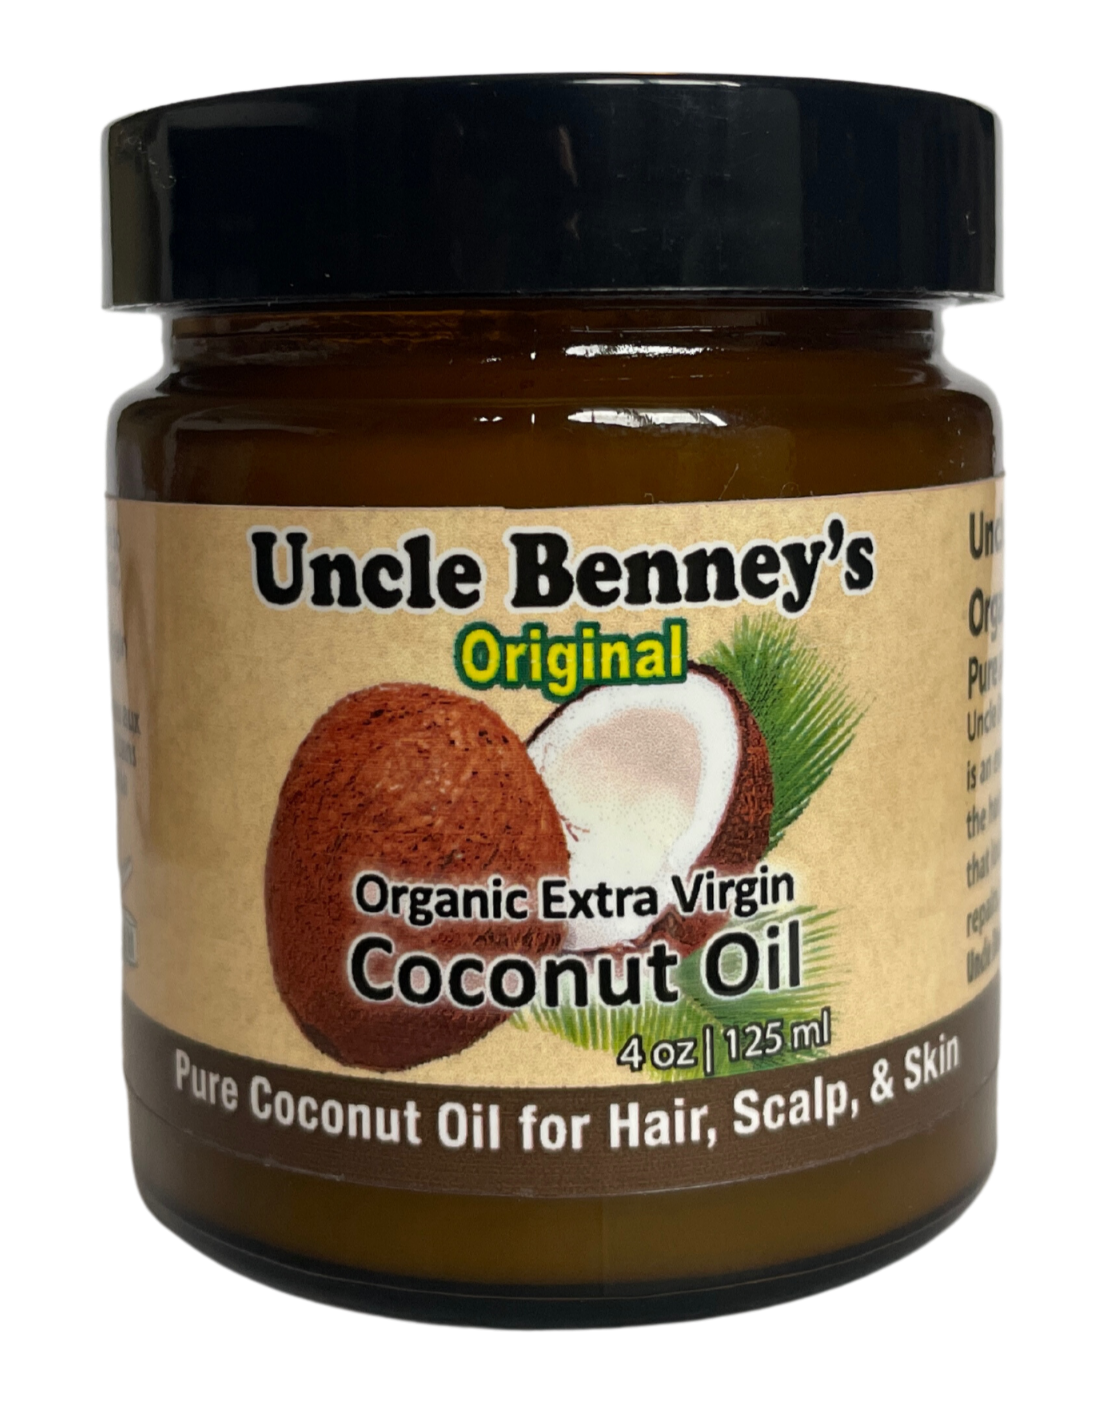 Uncle Benney's Original Organic extra virgin coconut oil, body oil , natural body moisturizer for soft skin, natural hair and scalp oil, shine oil, turmeric face mask butter, vitamin e face mask, coconut face mask, coconut butter